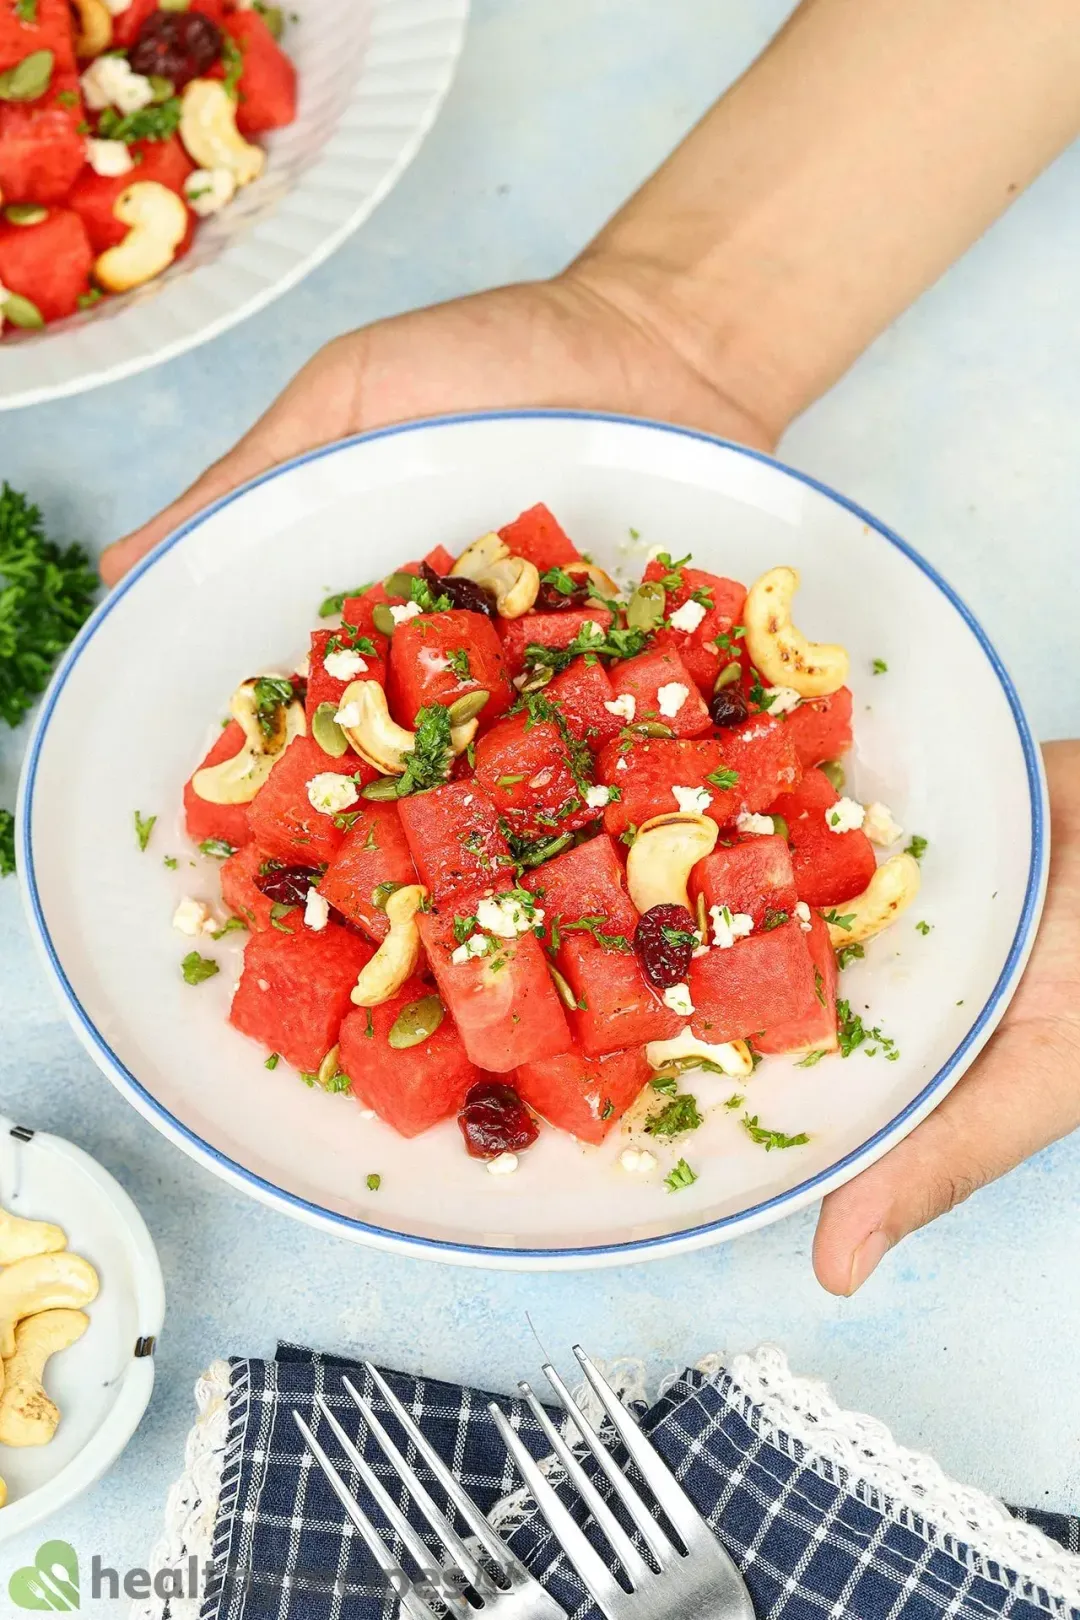 How to Store and Make Ahead watermelon salad